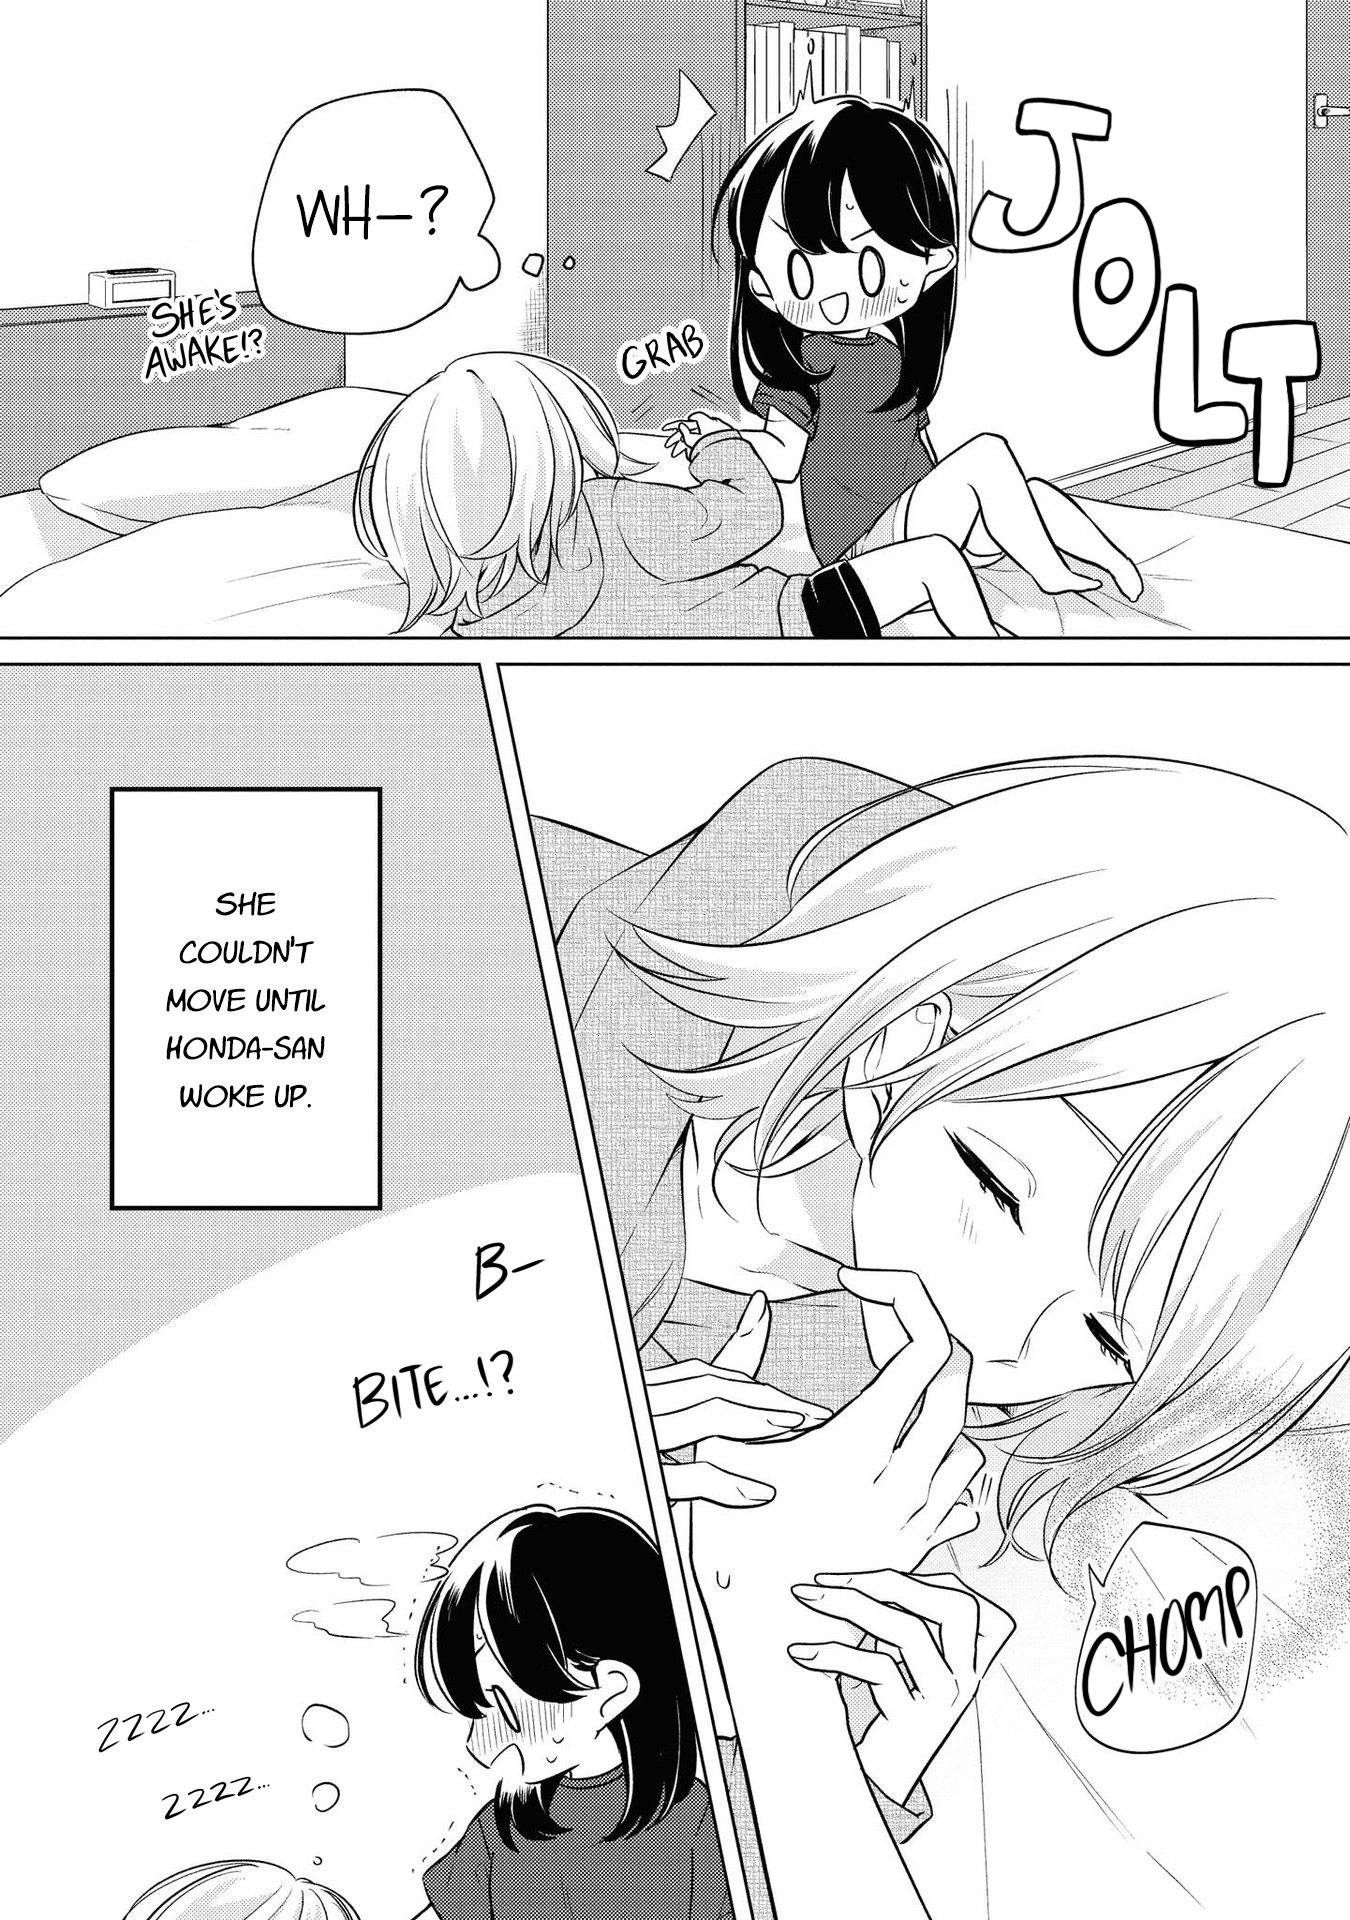 Can't Defy The Lonely Girl Vol.1 Chapter 5.1: Volume 1 Extras - Picture 2